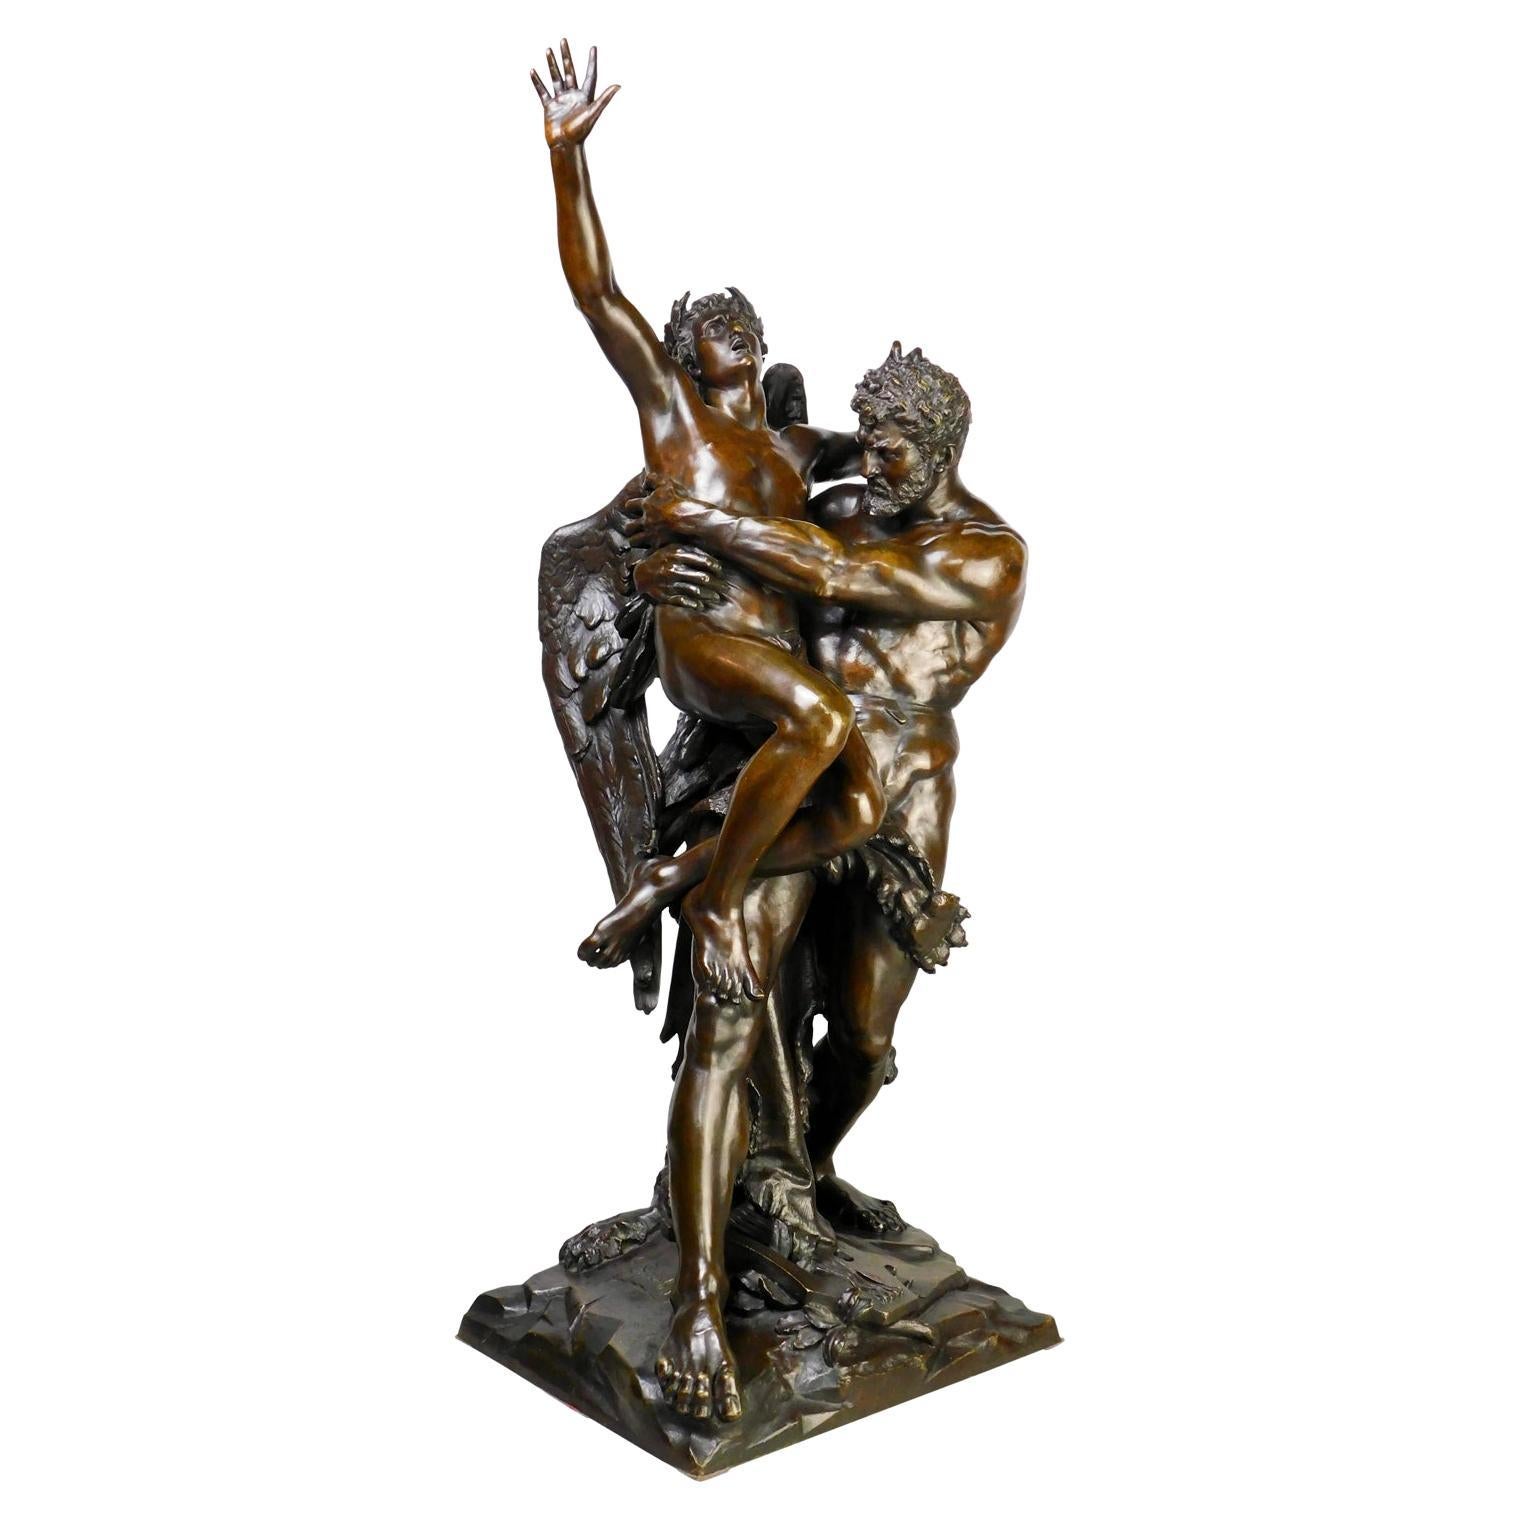 Antique Bronze Sculpture Genius and Brute Force by Cyprien Godebski For Sale